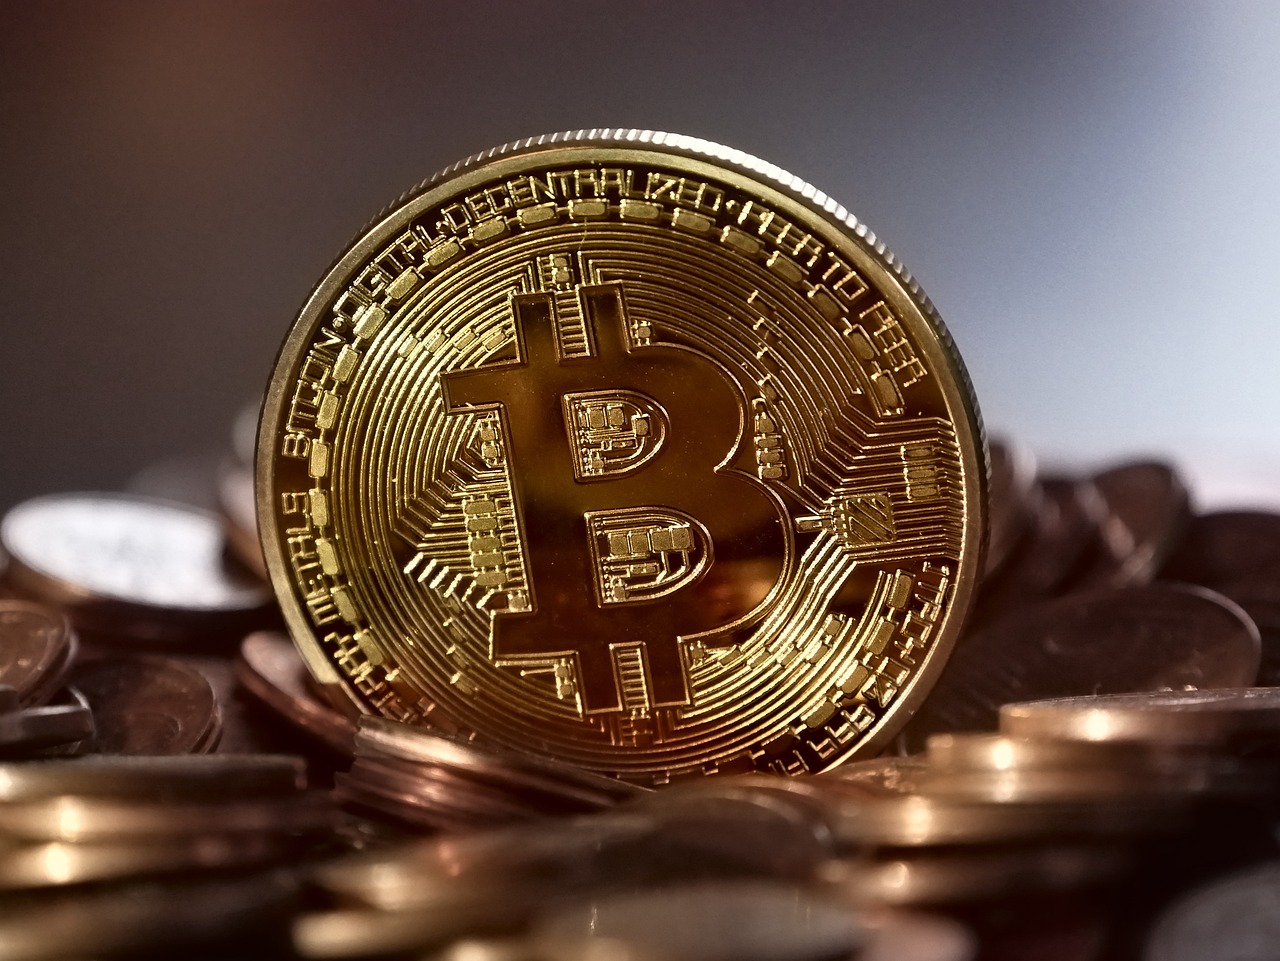 How to Buy Bitcoin in Nigeria?